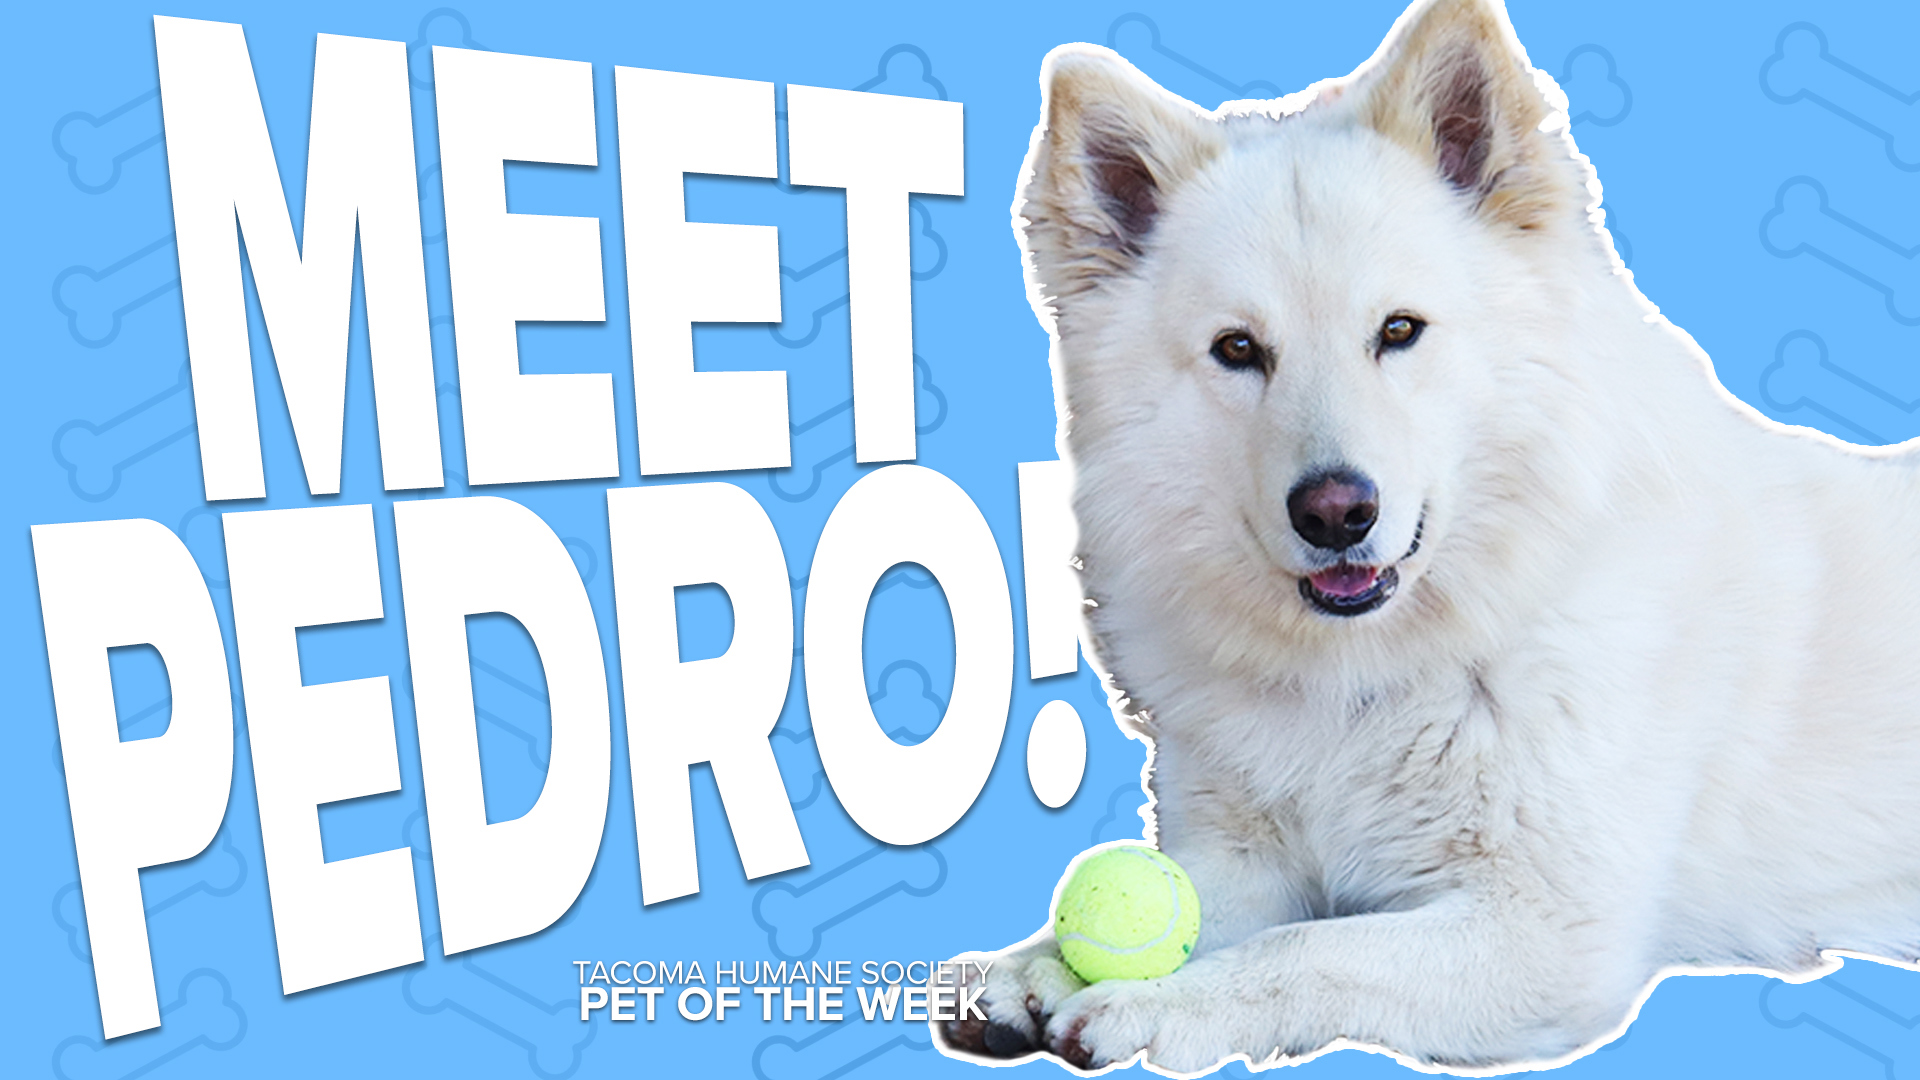 This week's featured adoptable pet of the week is Pedro!